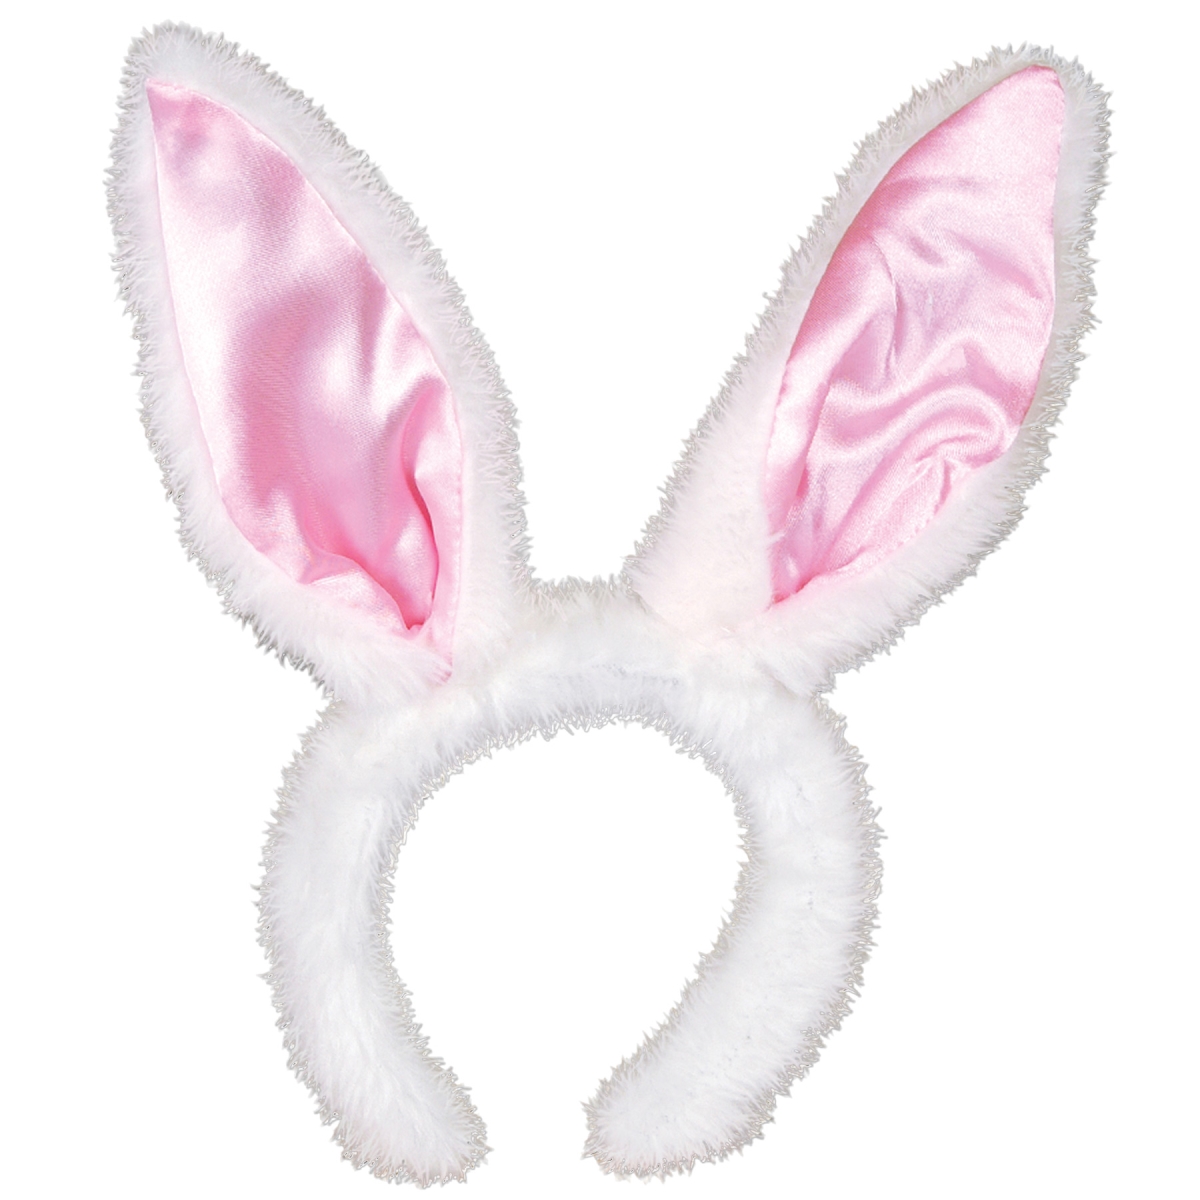 Picture of Morris Costumes BG40761 Bunny Ears White with Pink Satin Headband